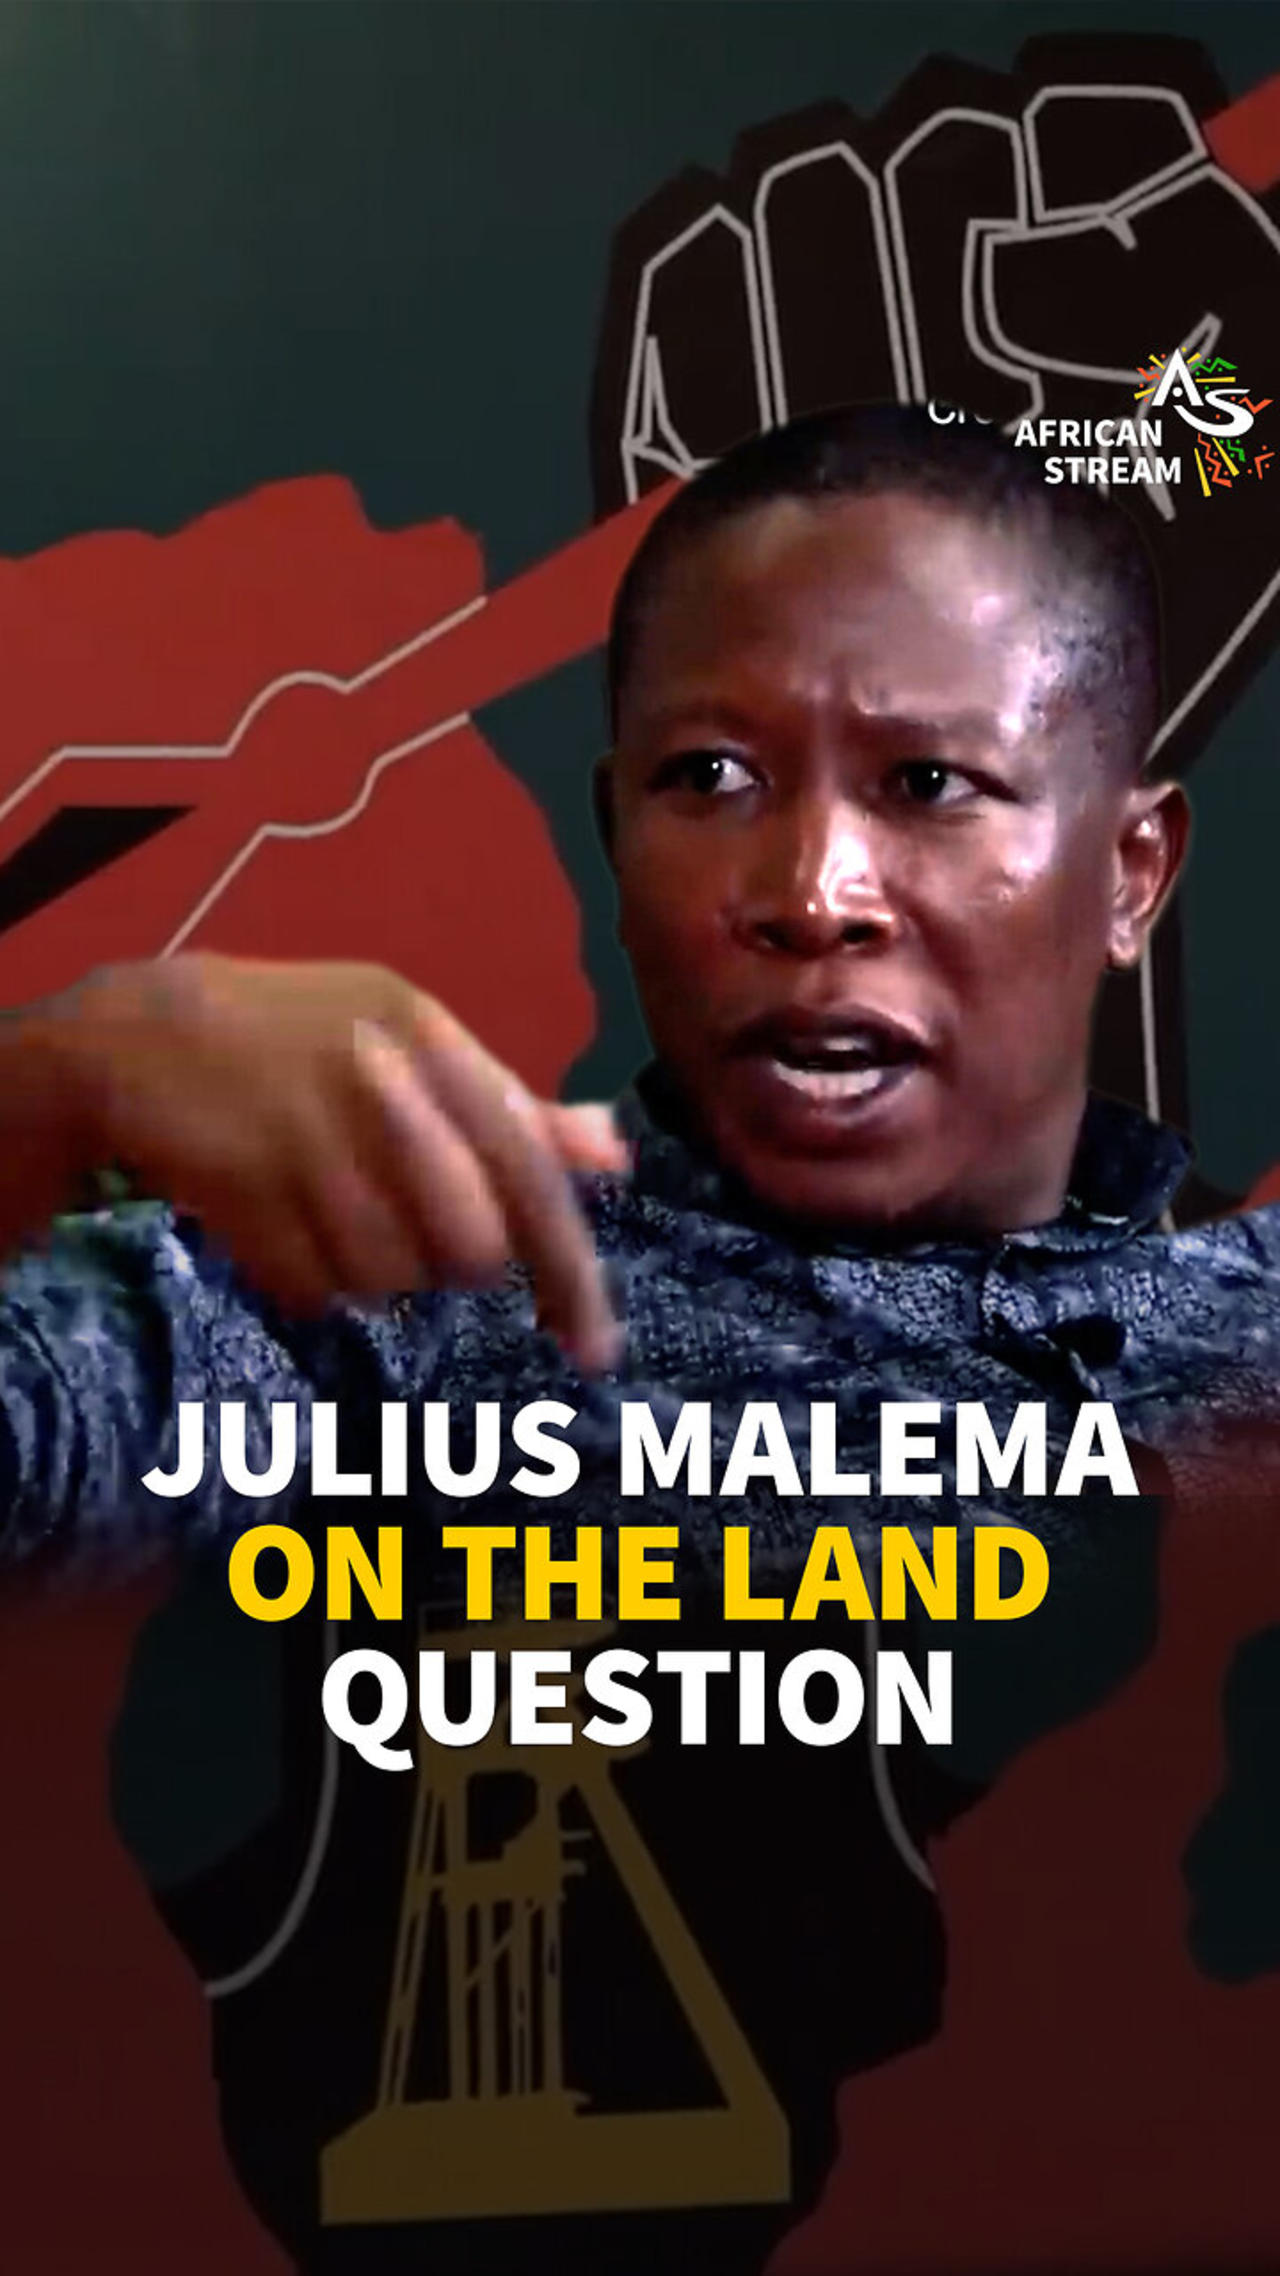 JULIUS MALEMA ON THE LAND QUESTION